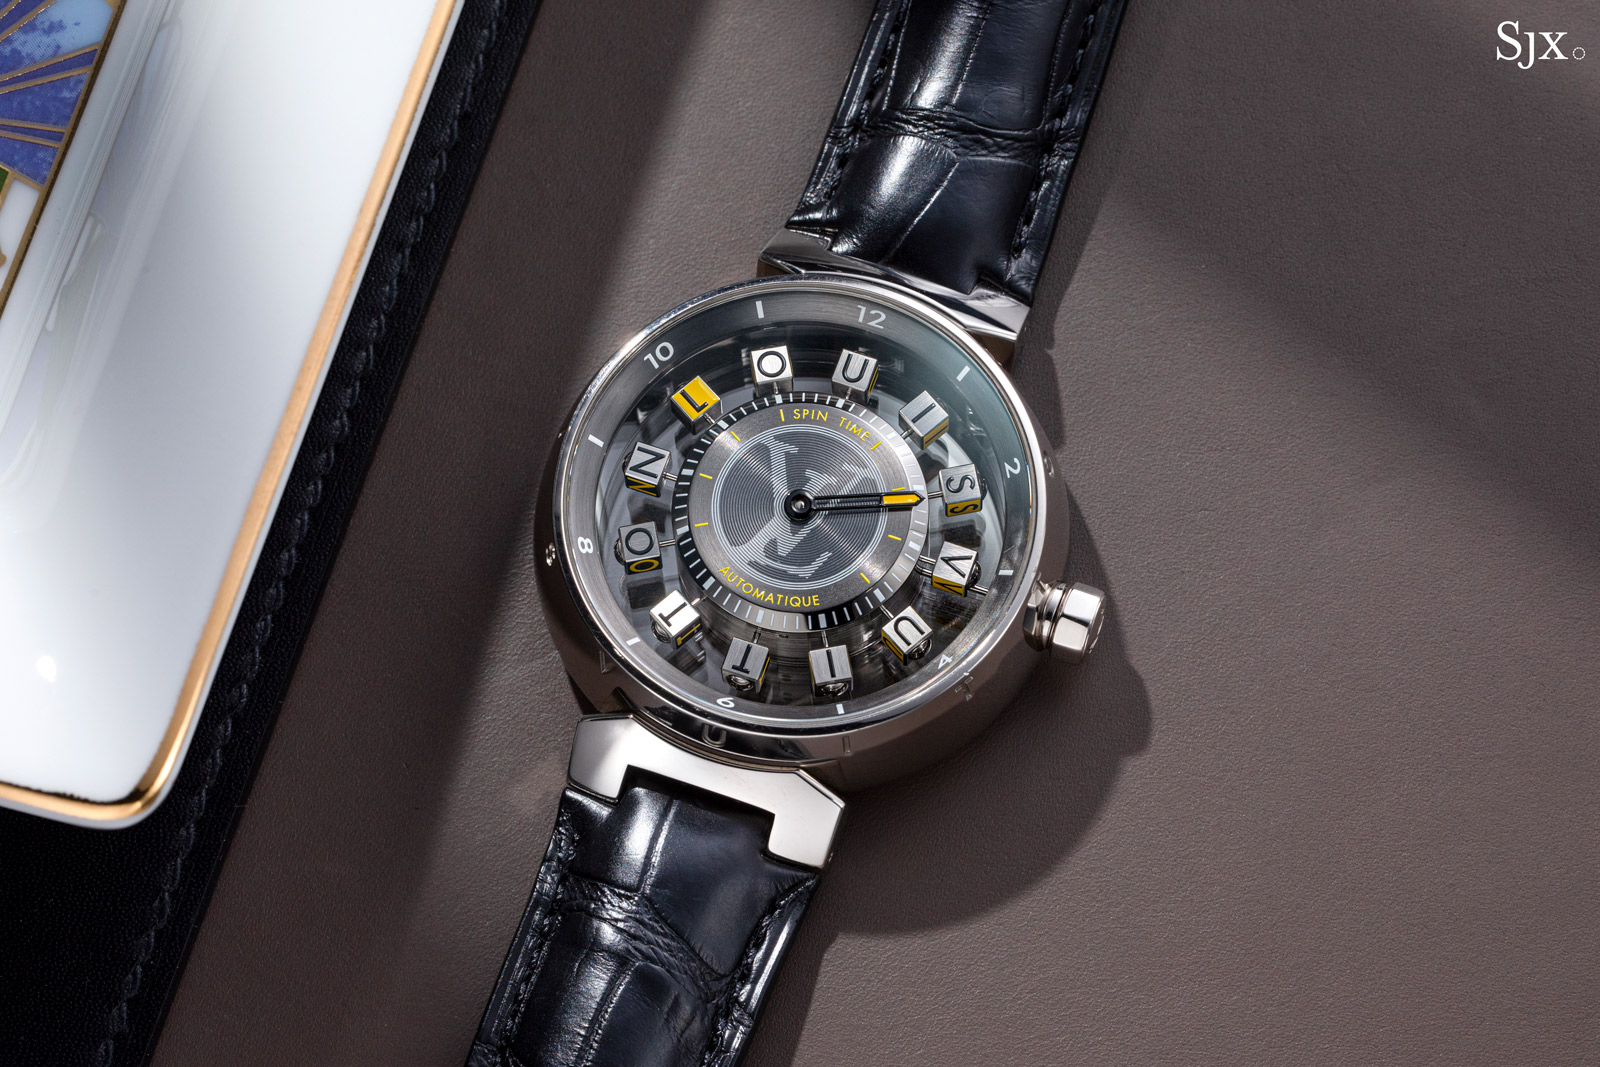 Introducing The Louis Vuitton Tambour Spin Time Air Quantum and